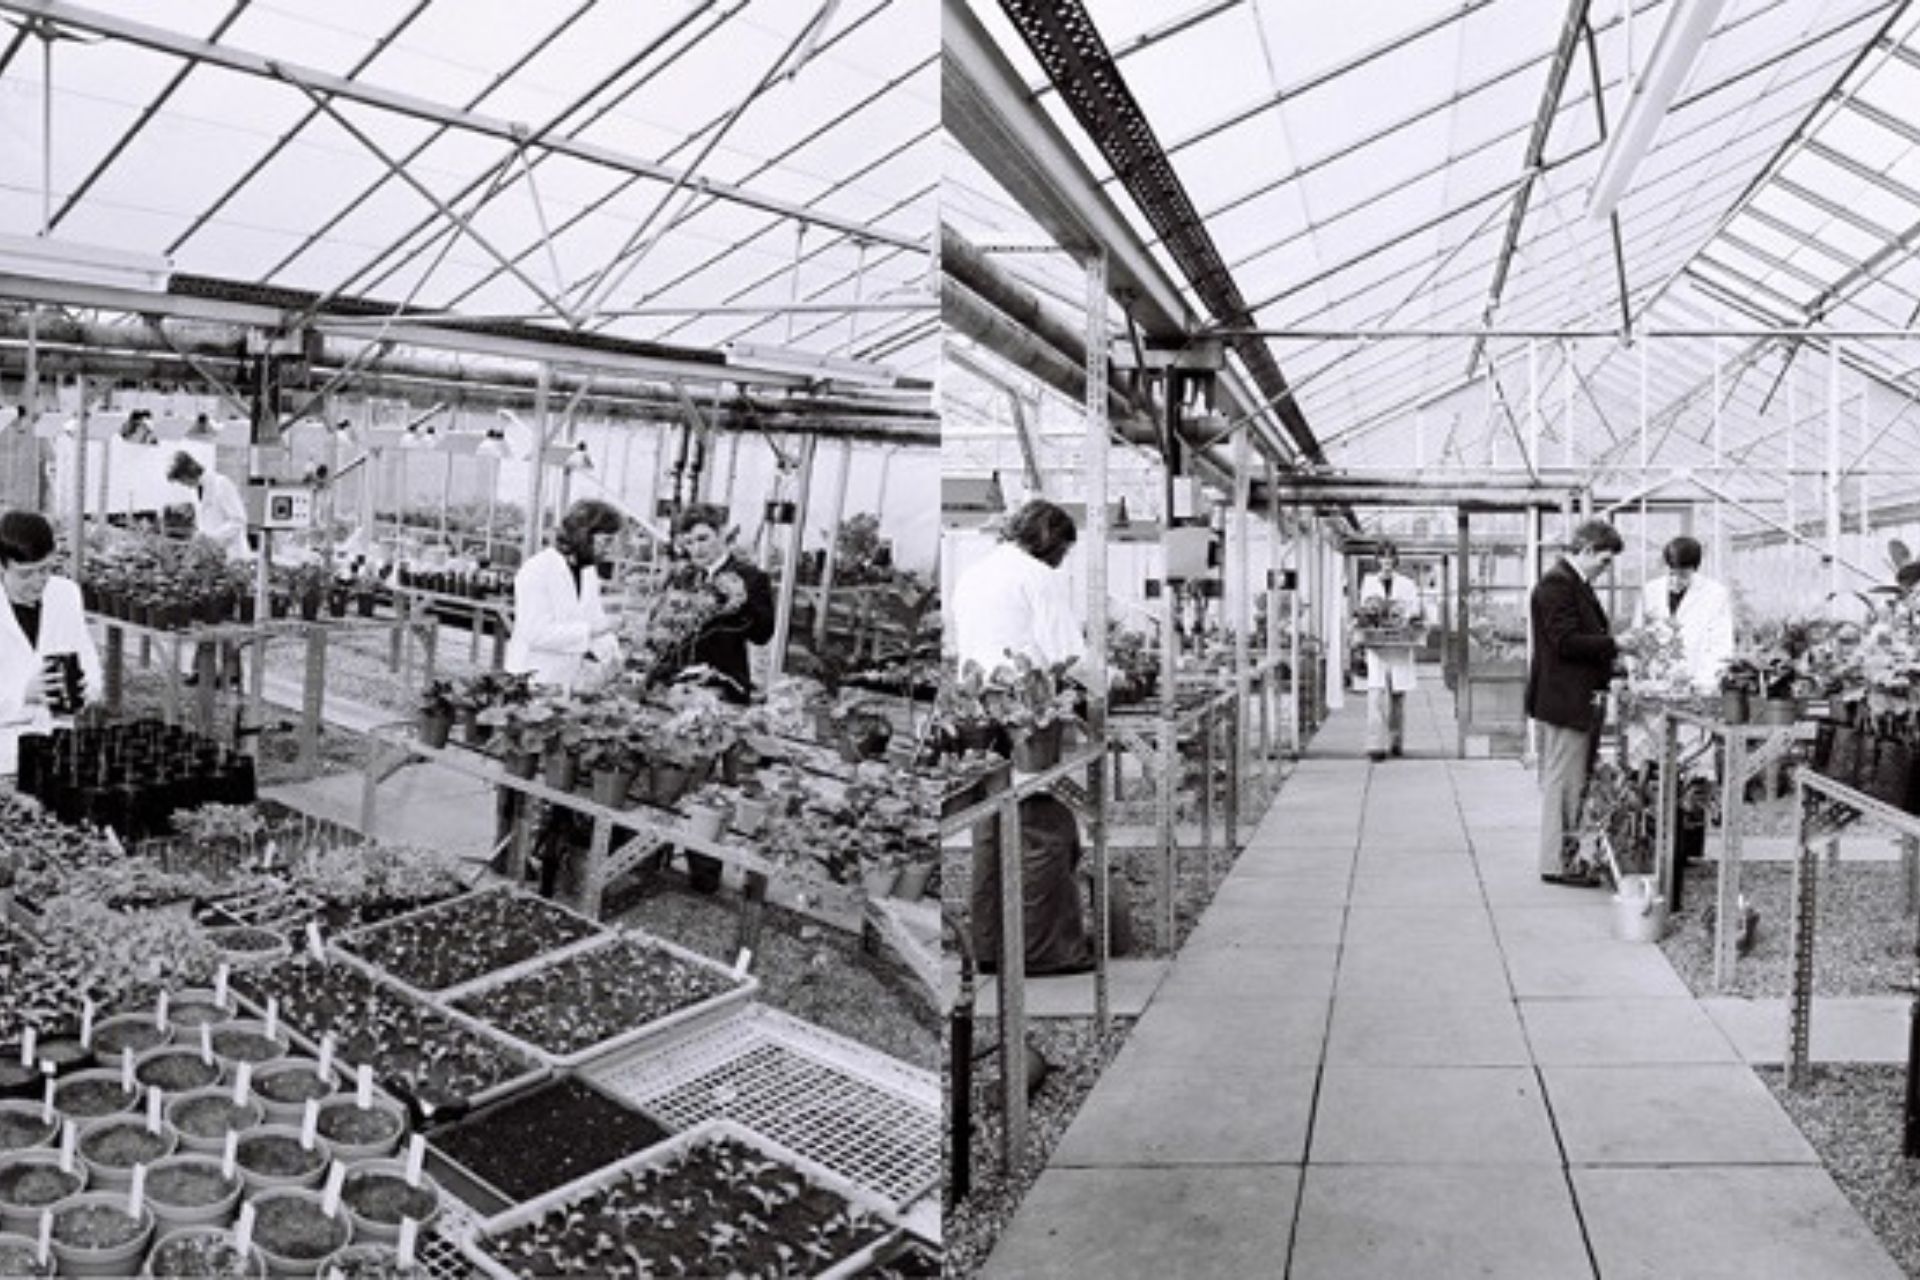 Botanic Garden Conservatory and Glassroom sections as they were in the 1970s